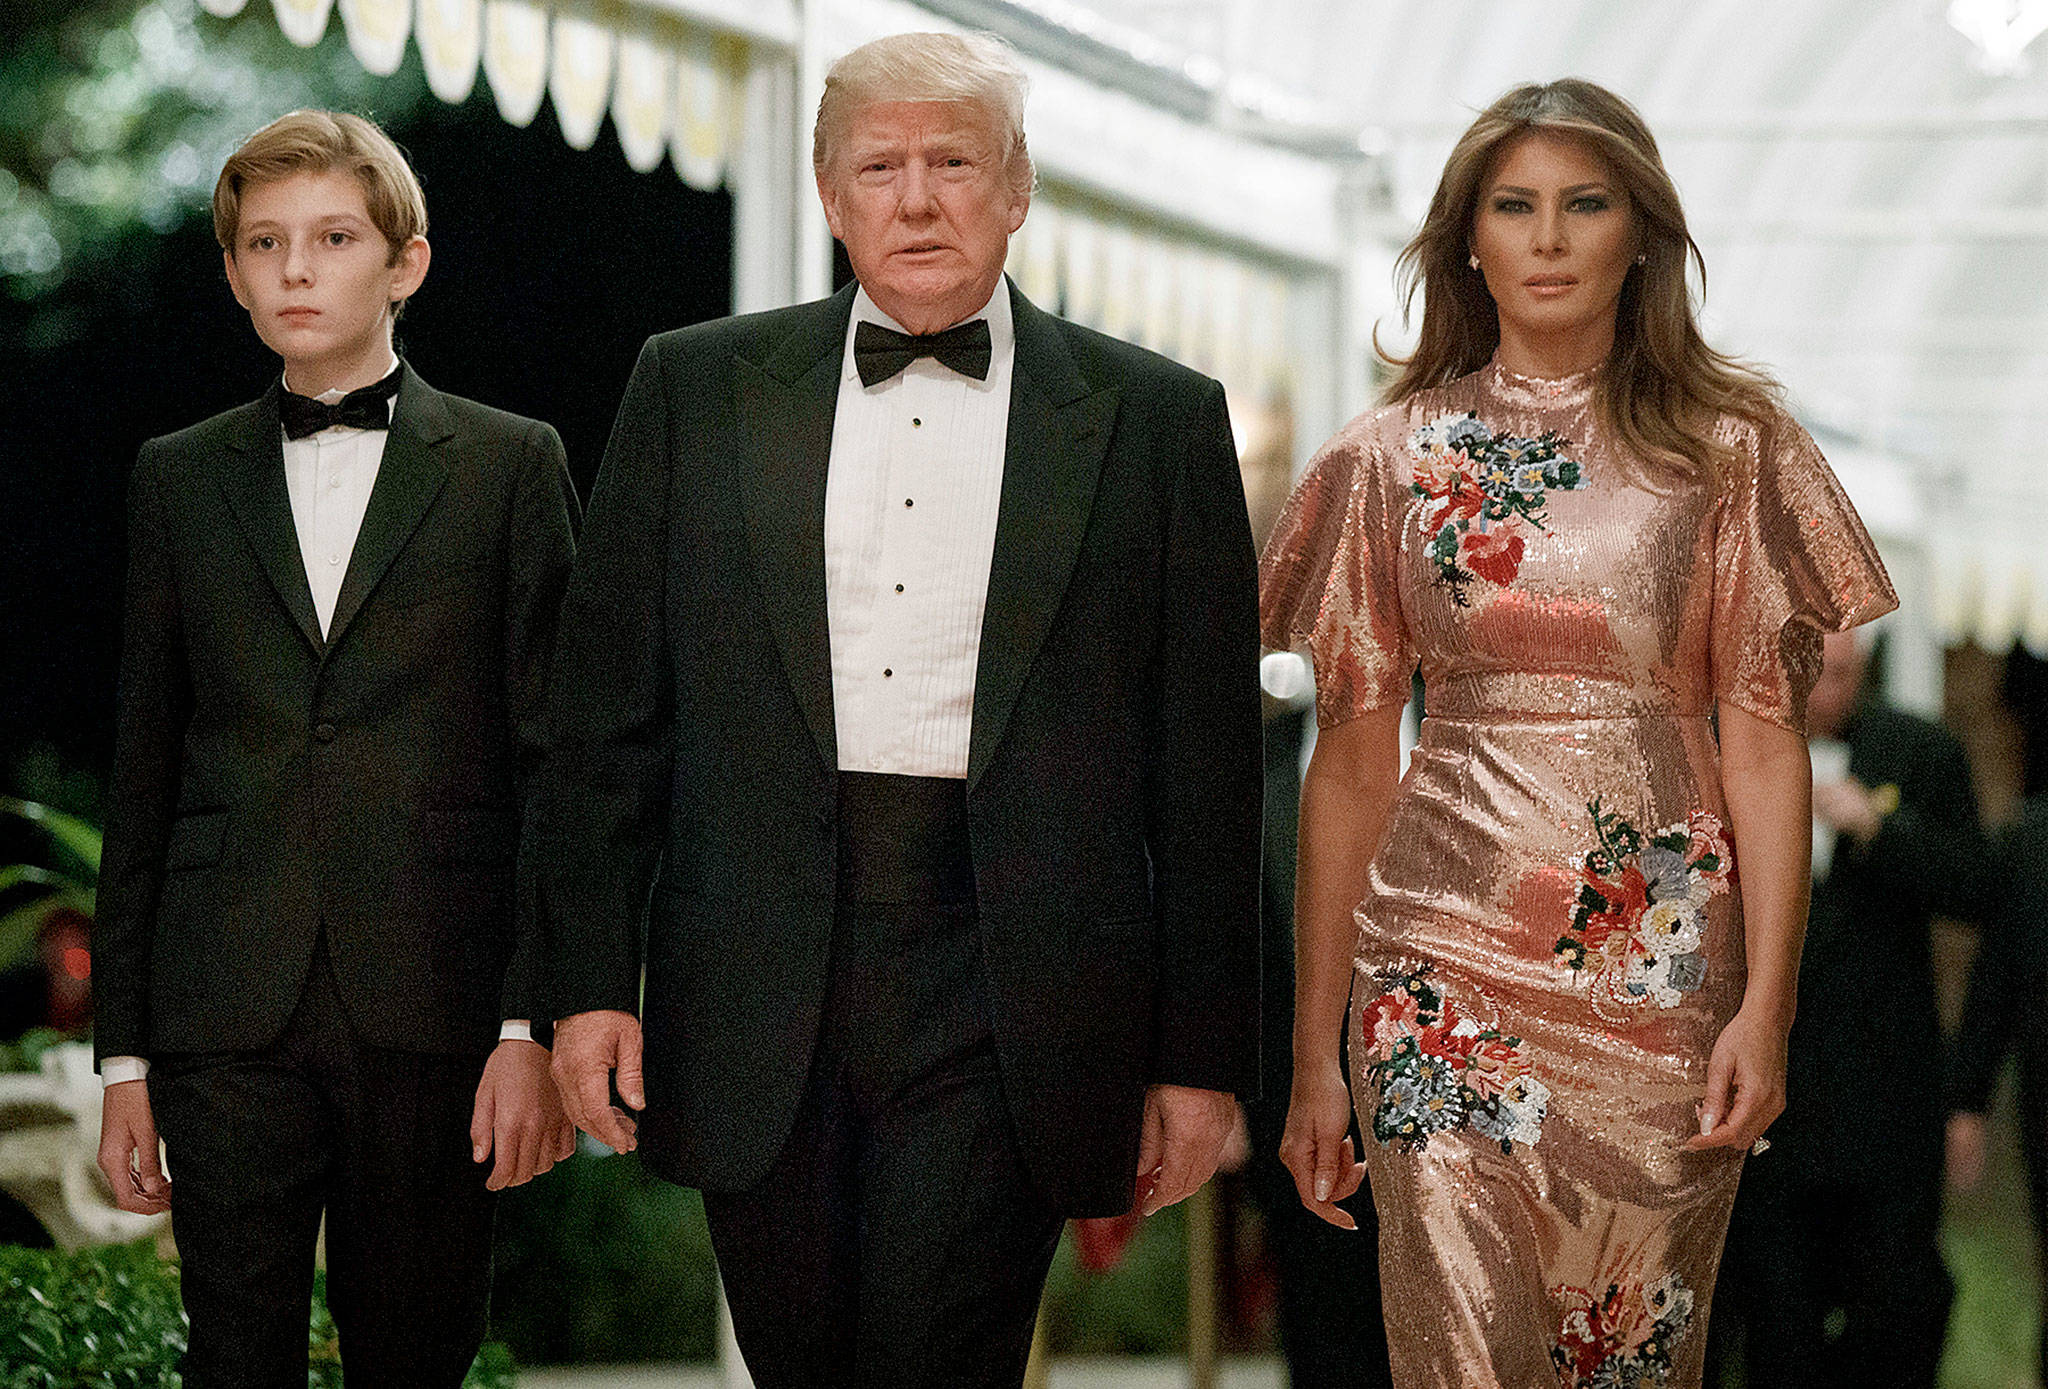 President Donald Trump arrives for a New Year’s Eve gala at his Mar-a-Lago resort with first lady Melania Trump and their son, Barron, on Sunday in Palm Beach, Florida. (AP Photo/Evan Vucci)